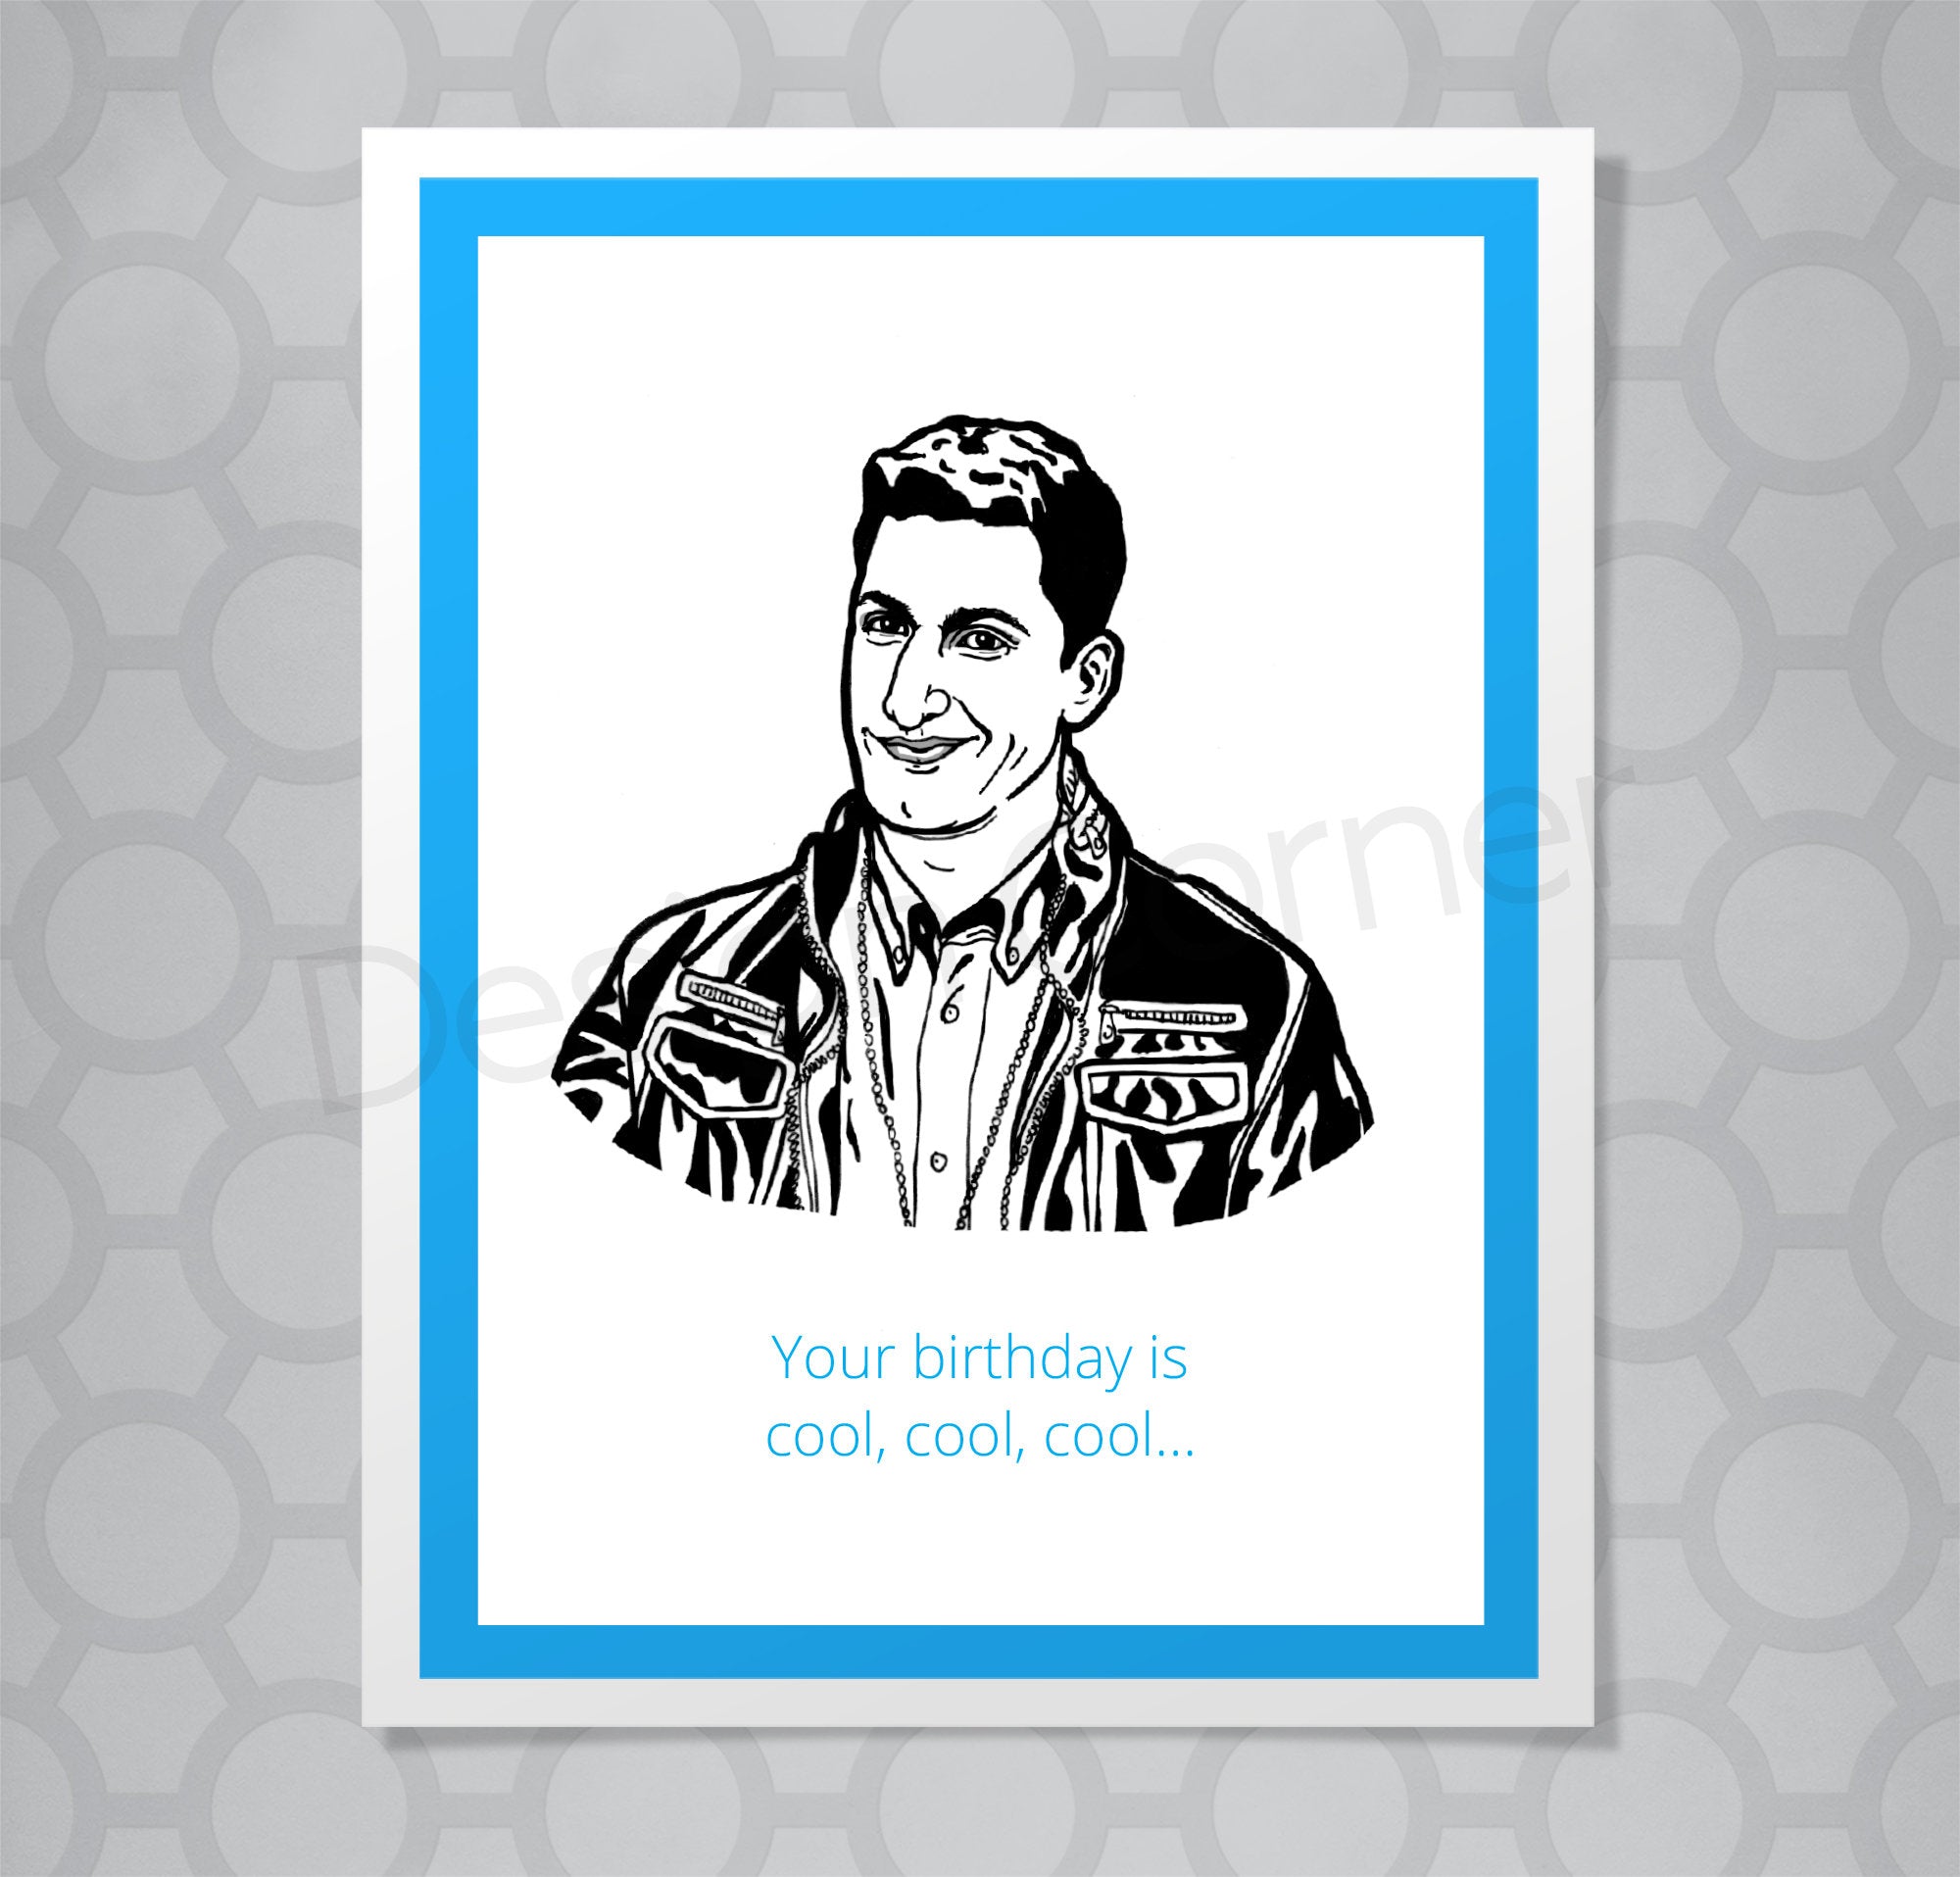 Illustration of Brooklyn Nine Nine's jake on a greeting card. Caption says "Your birthday is cool, cool, cool..."